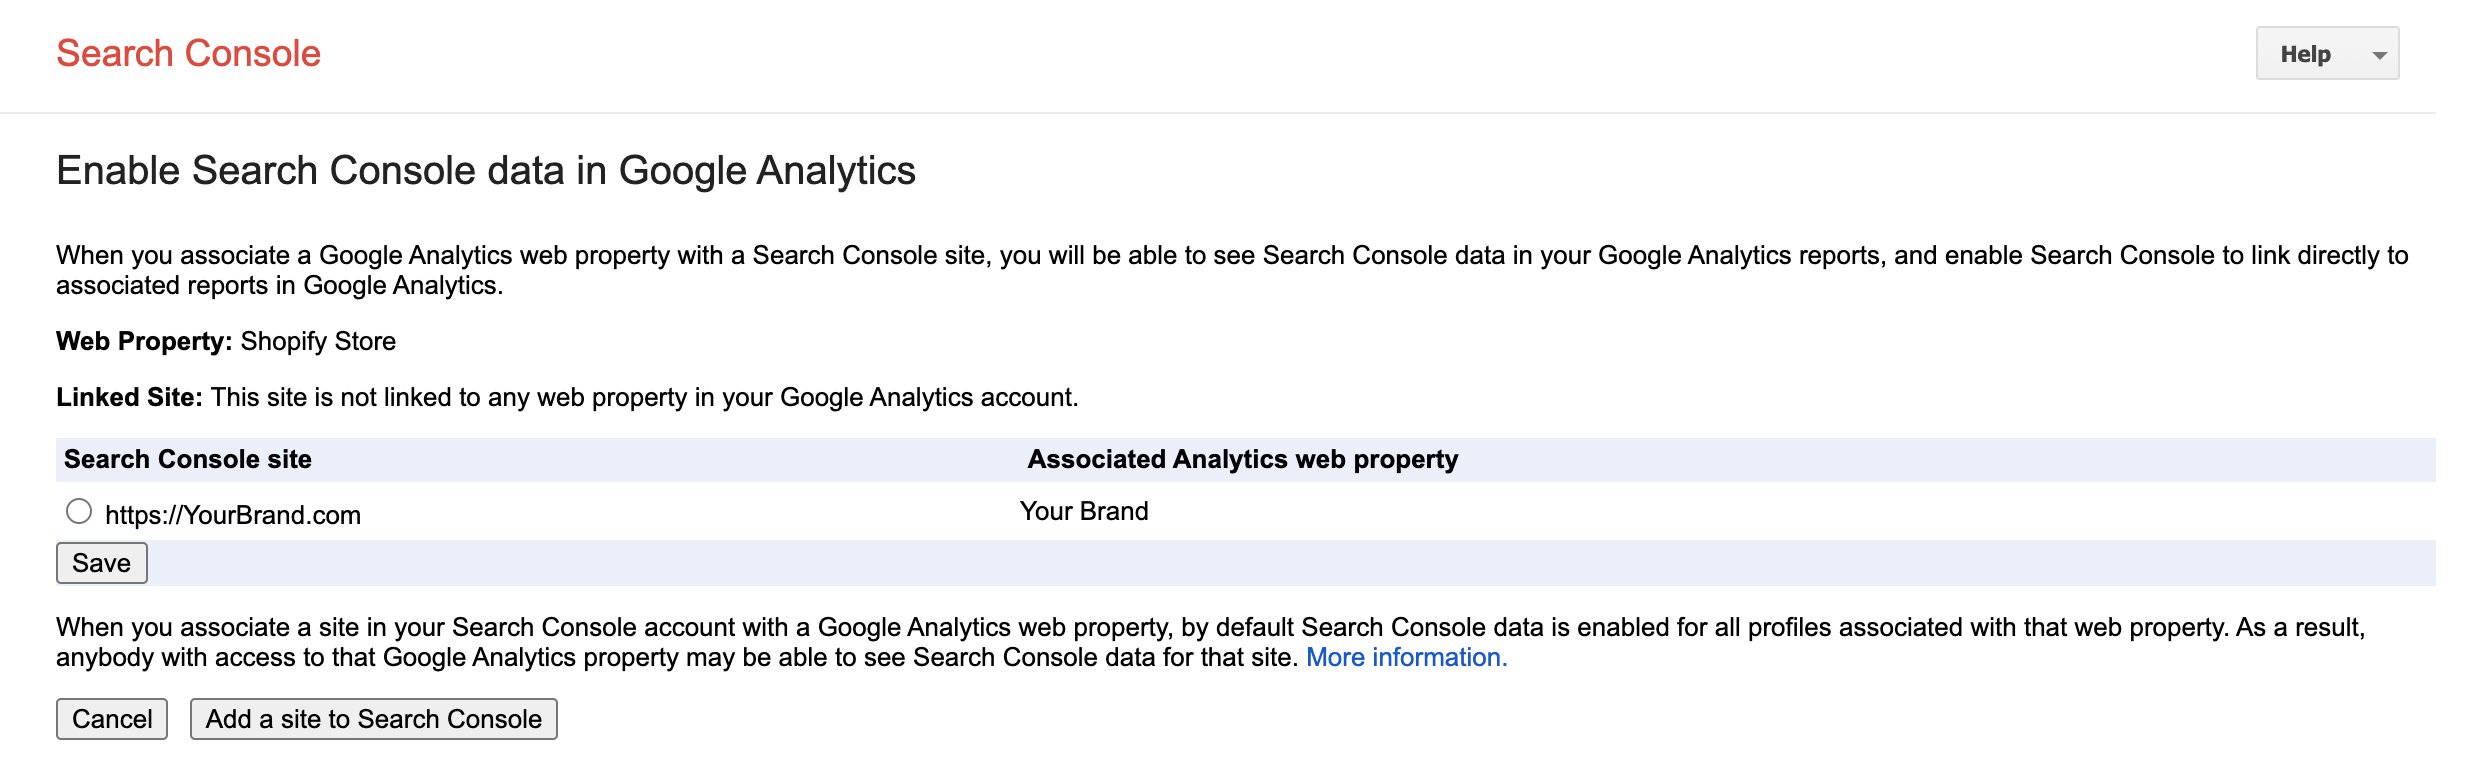 Linking a Search Console site in the GA admin panel